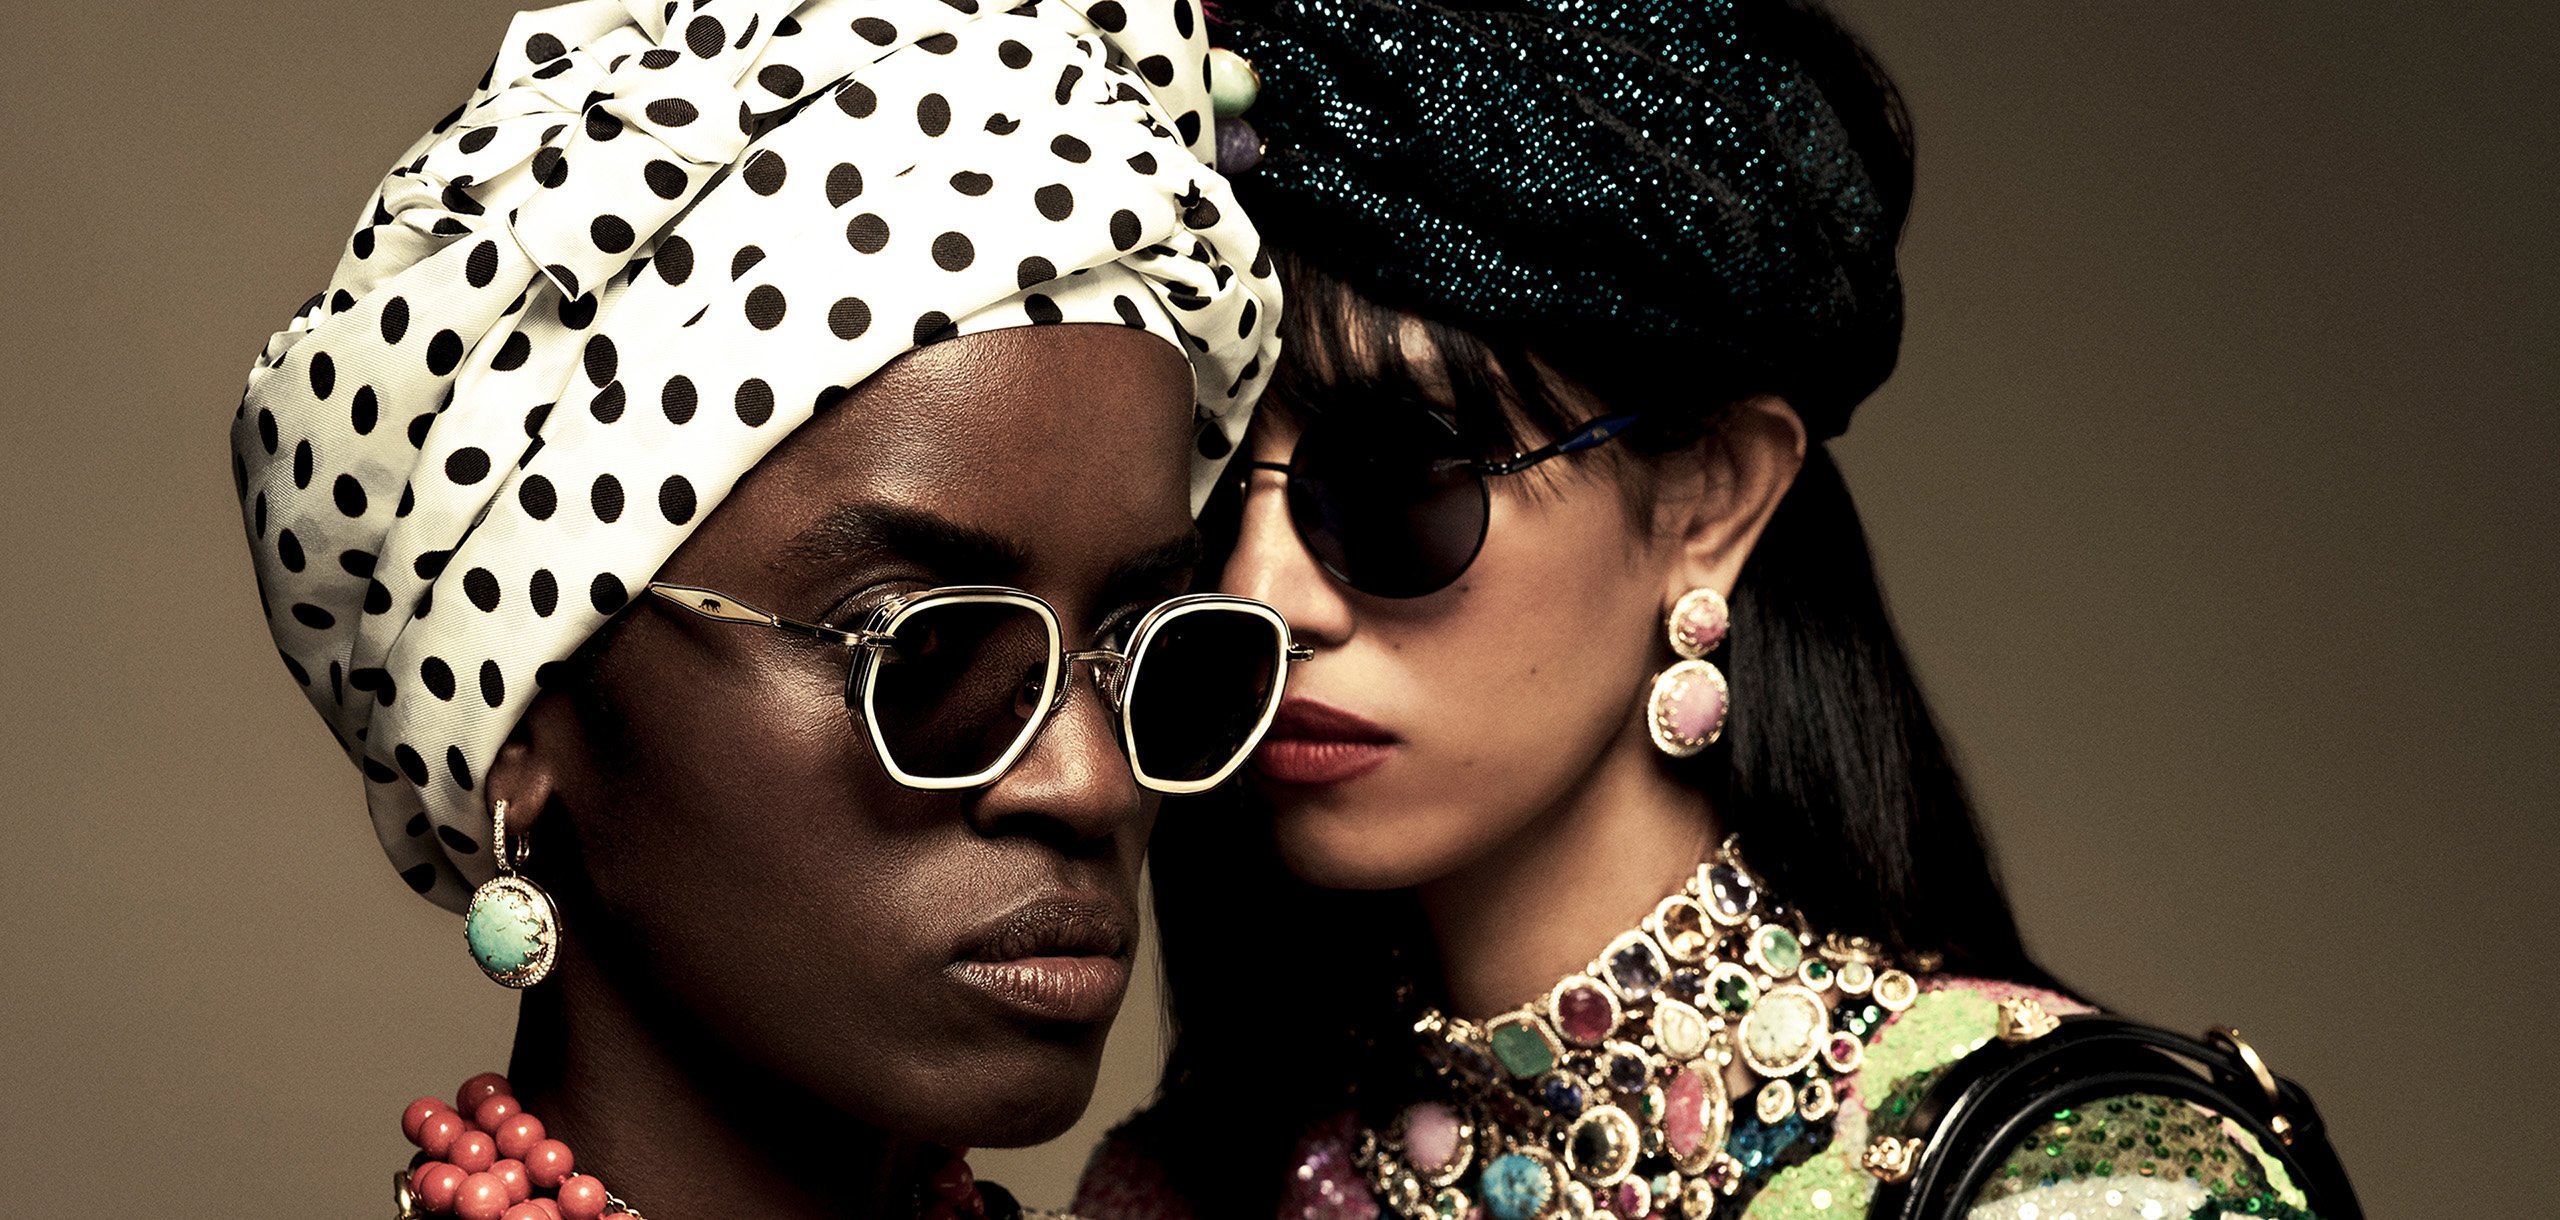 Portrait of models up-close wearing Morgenthal Frederics sunglasses styled with crystal and stone jewelry